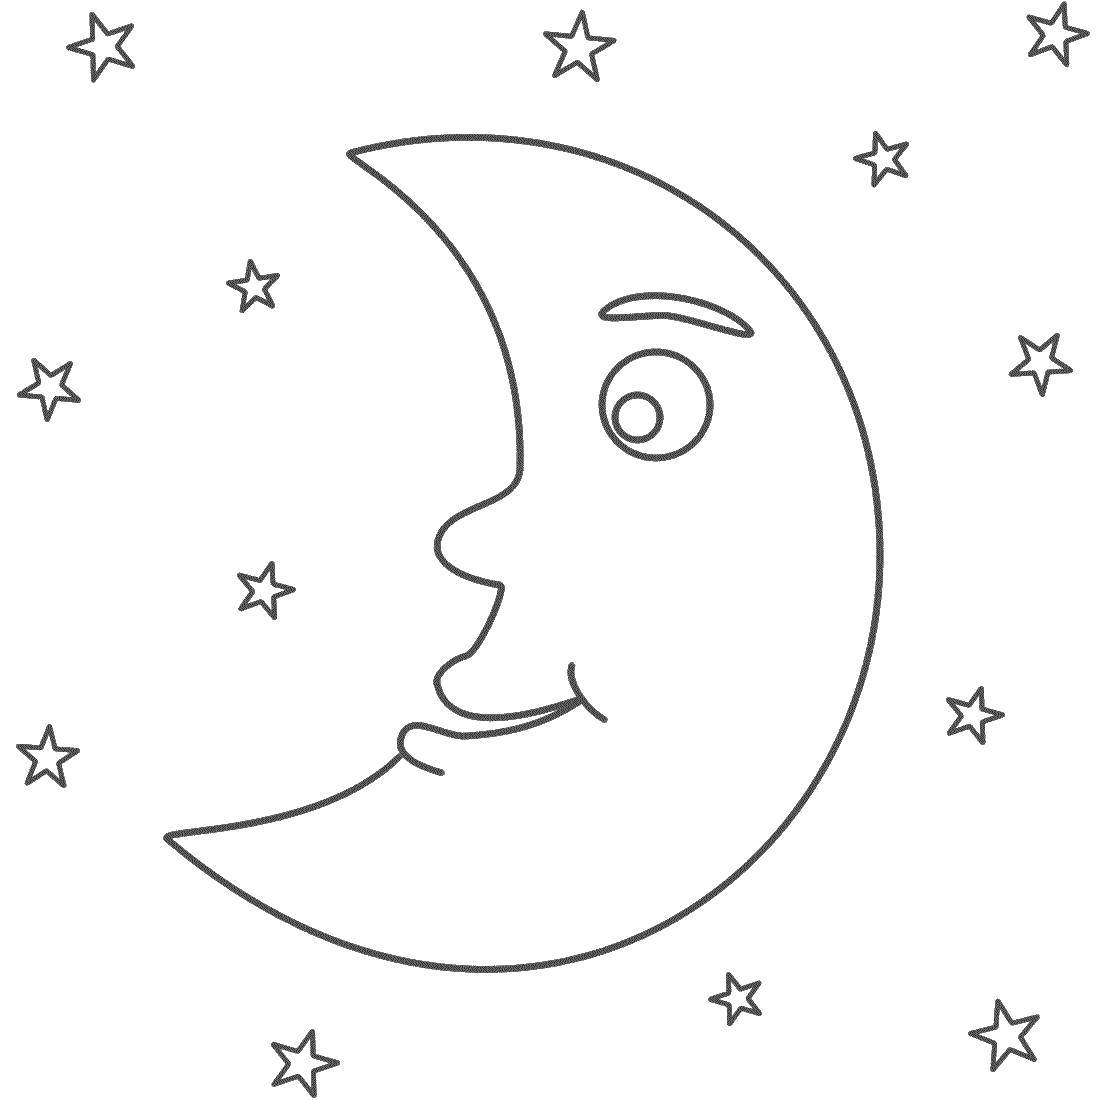 Coloring The moon and the stars. Category star. Tags:  star.